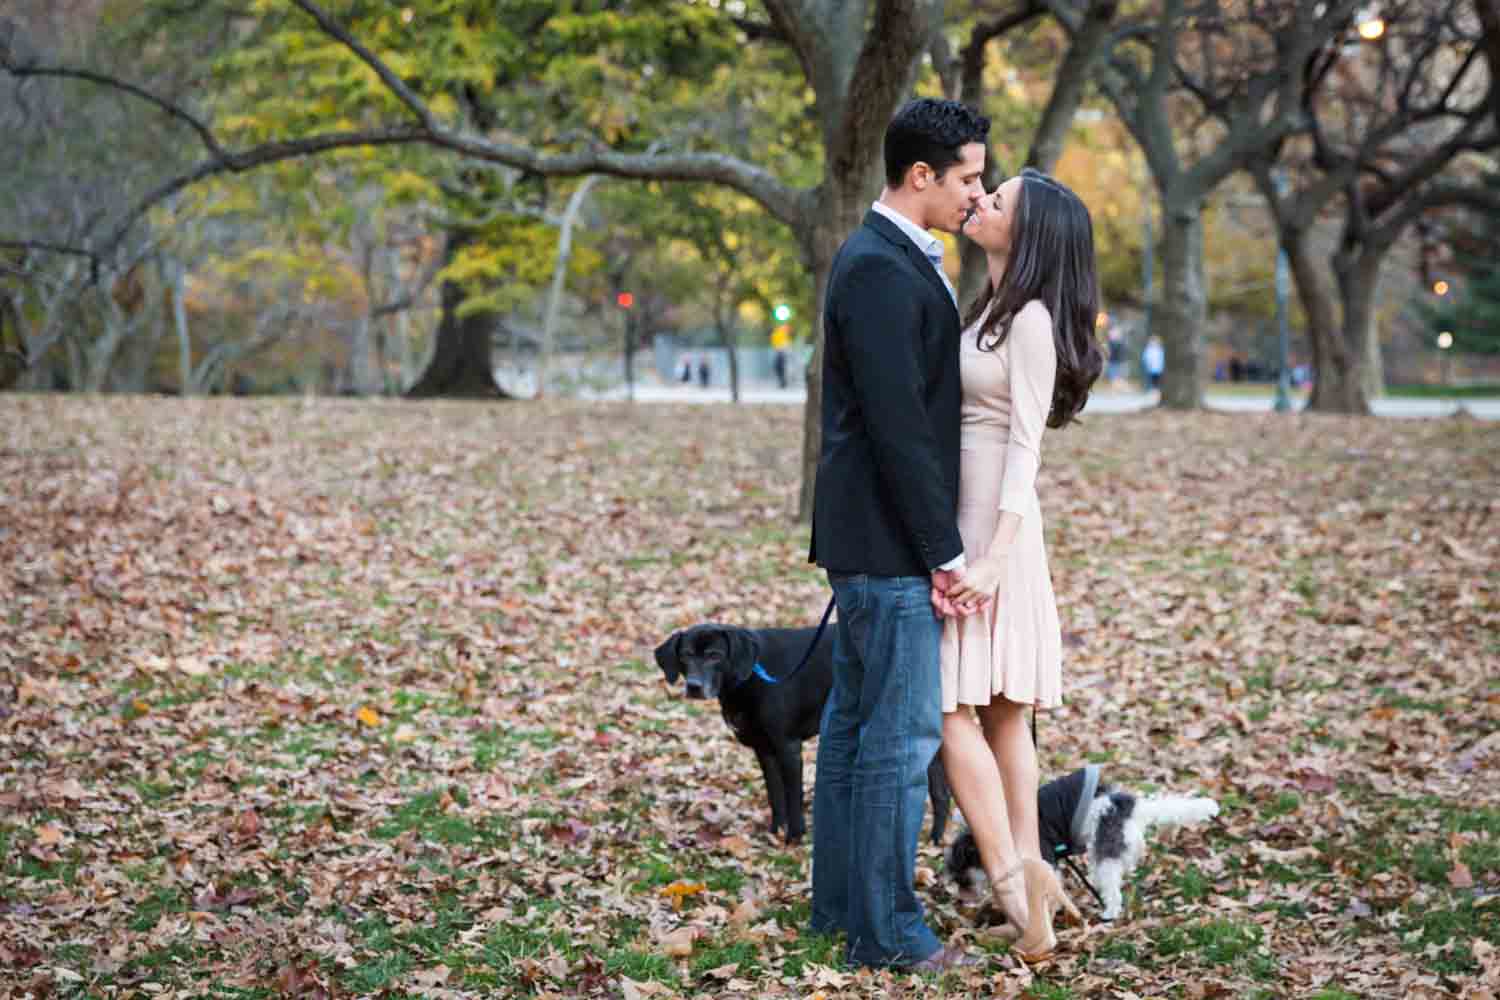 Couple kissing with two dogs at their feet